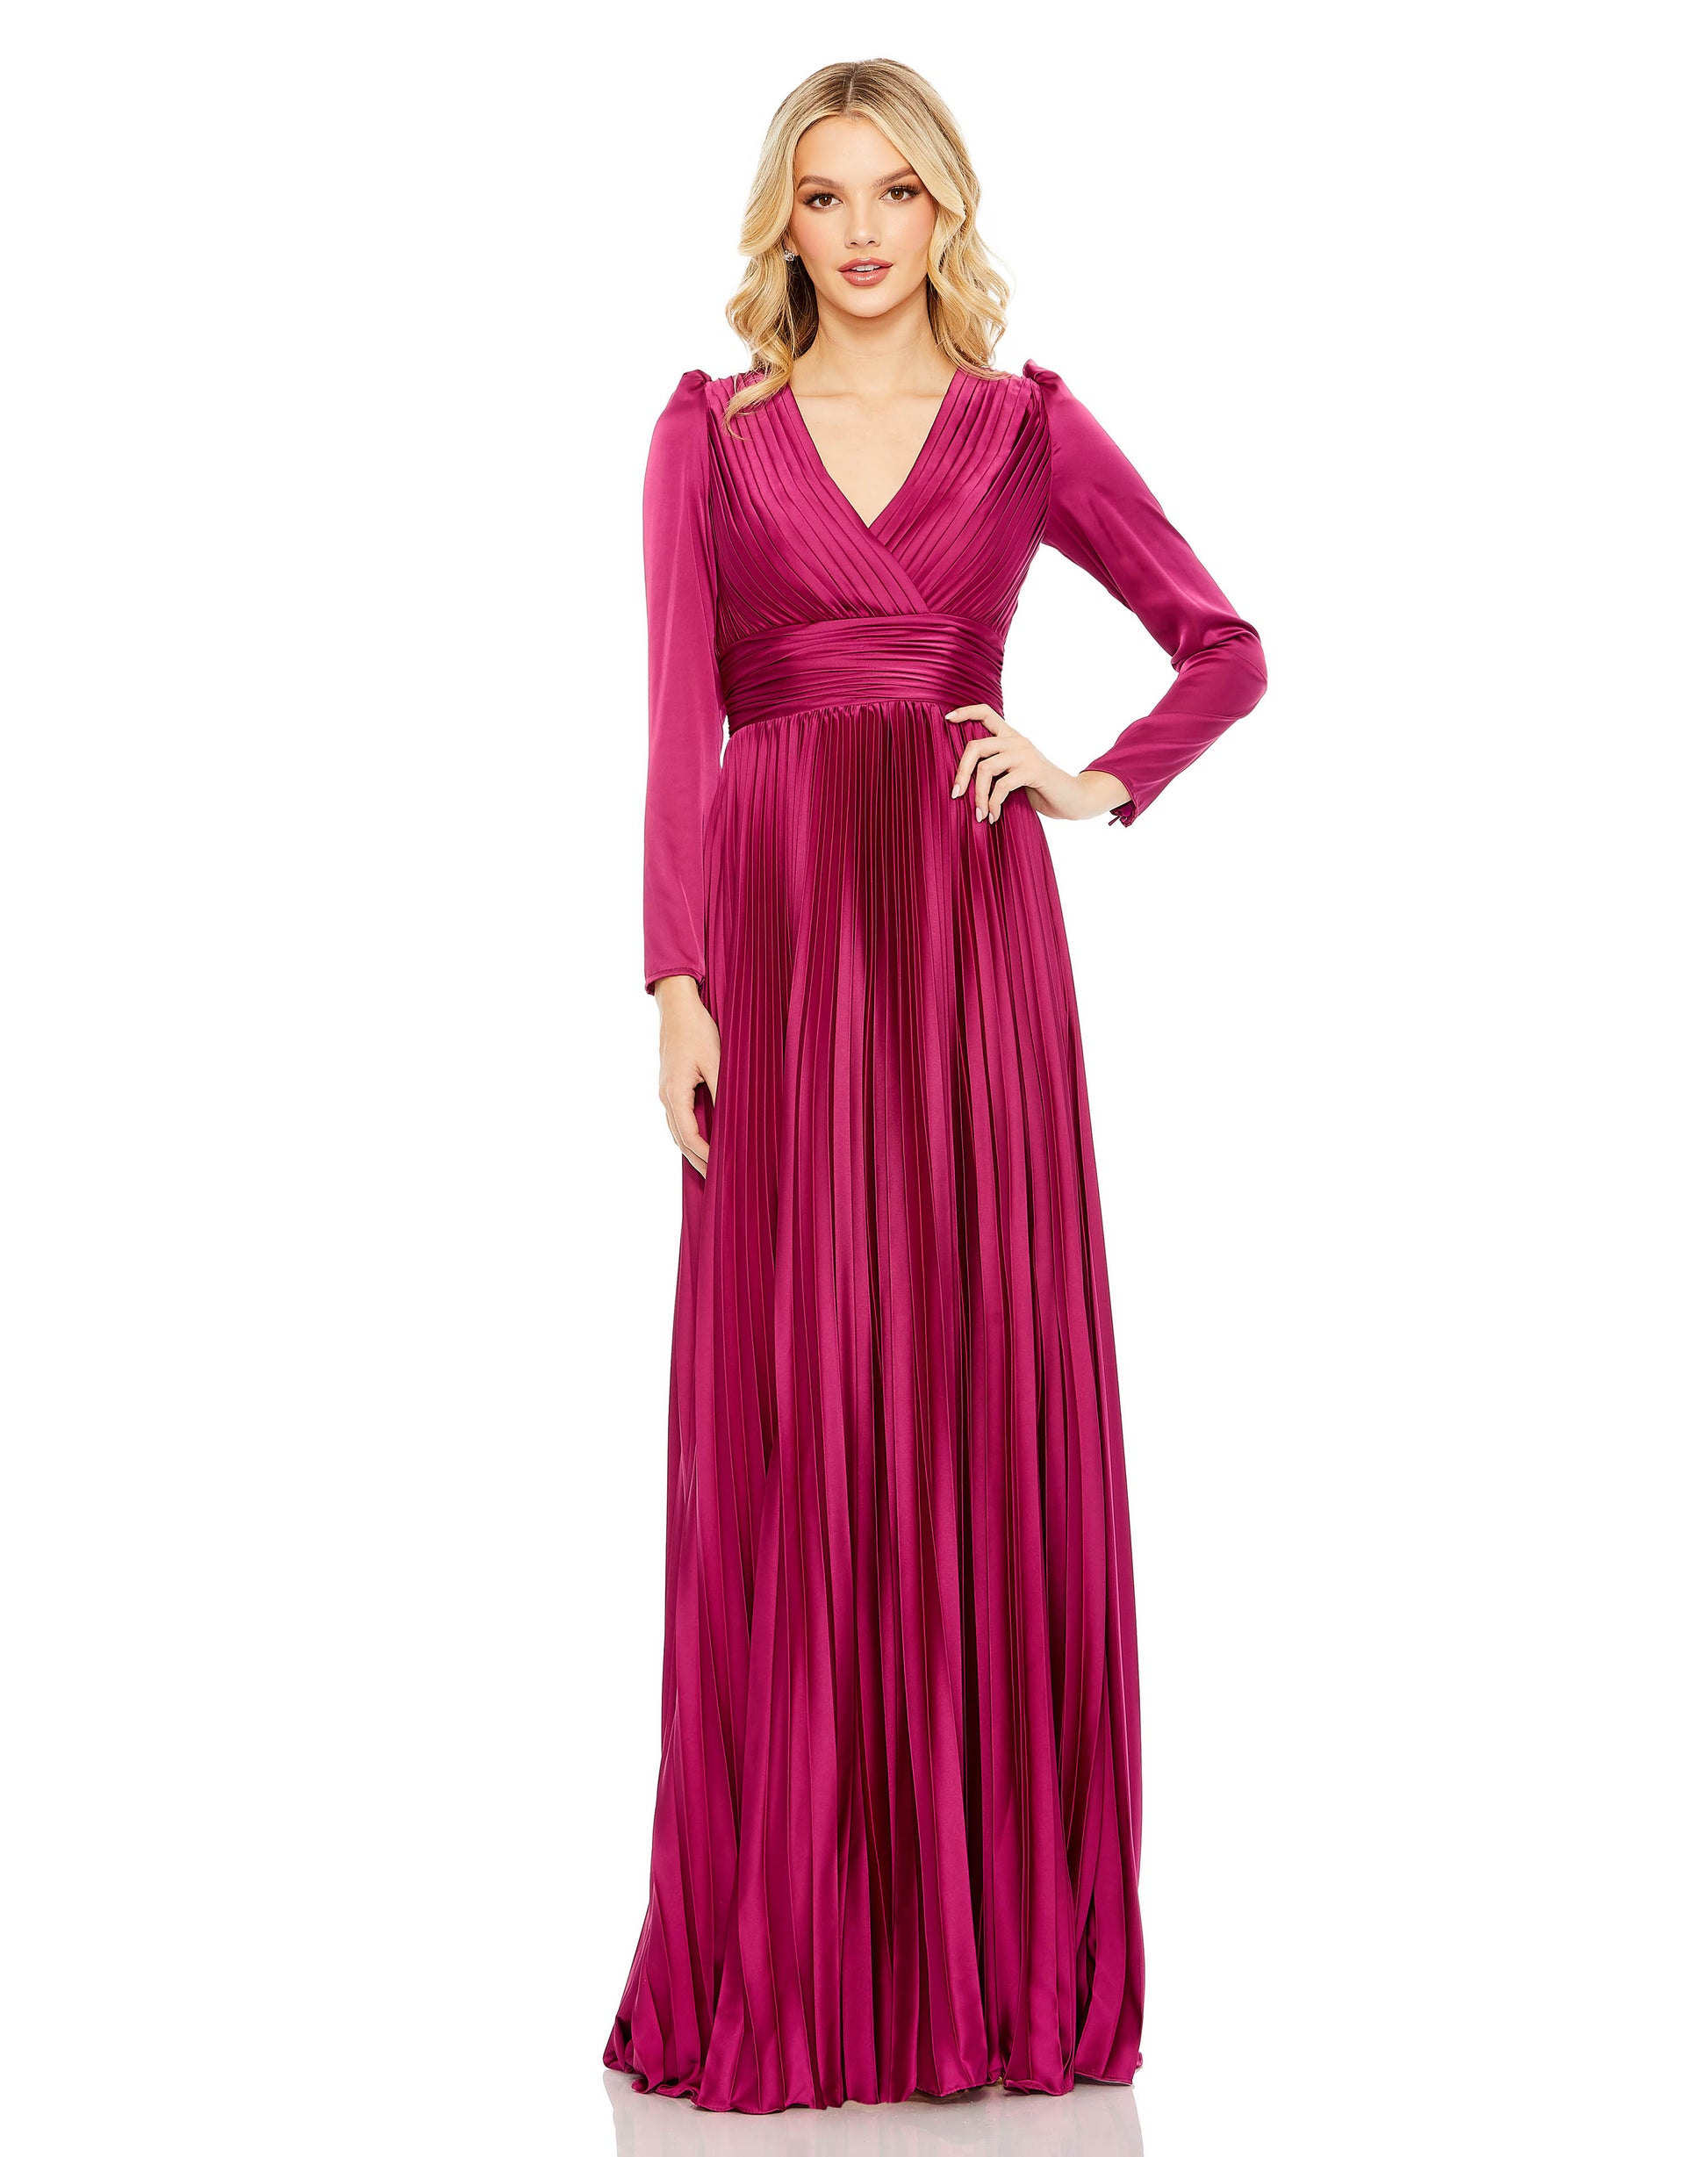 Chic faux-wrap satin gown with puffed shoulders, a v-neckline with a pleated bodice and a full-length pleated skirt. Ieena for Mac Duggal Fully Lined Back Zipper 100% Polyester Floor Length Long Sleeve Style #26542